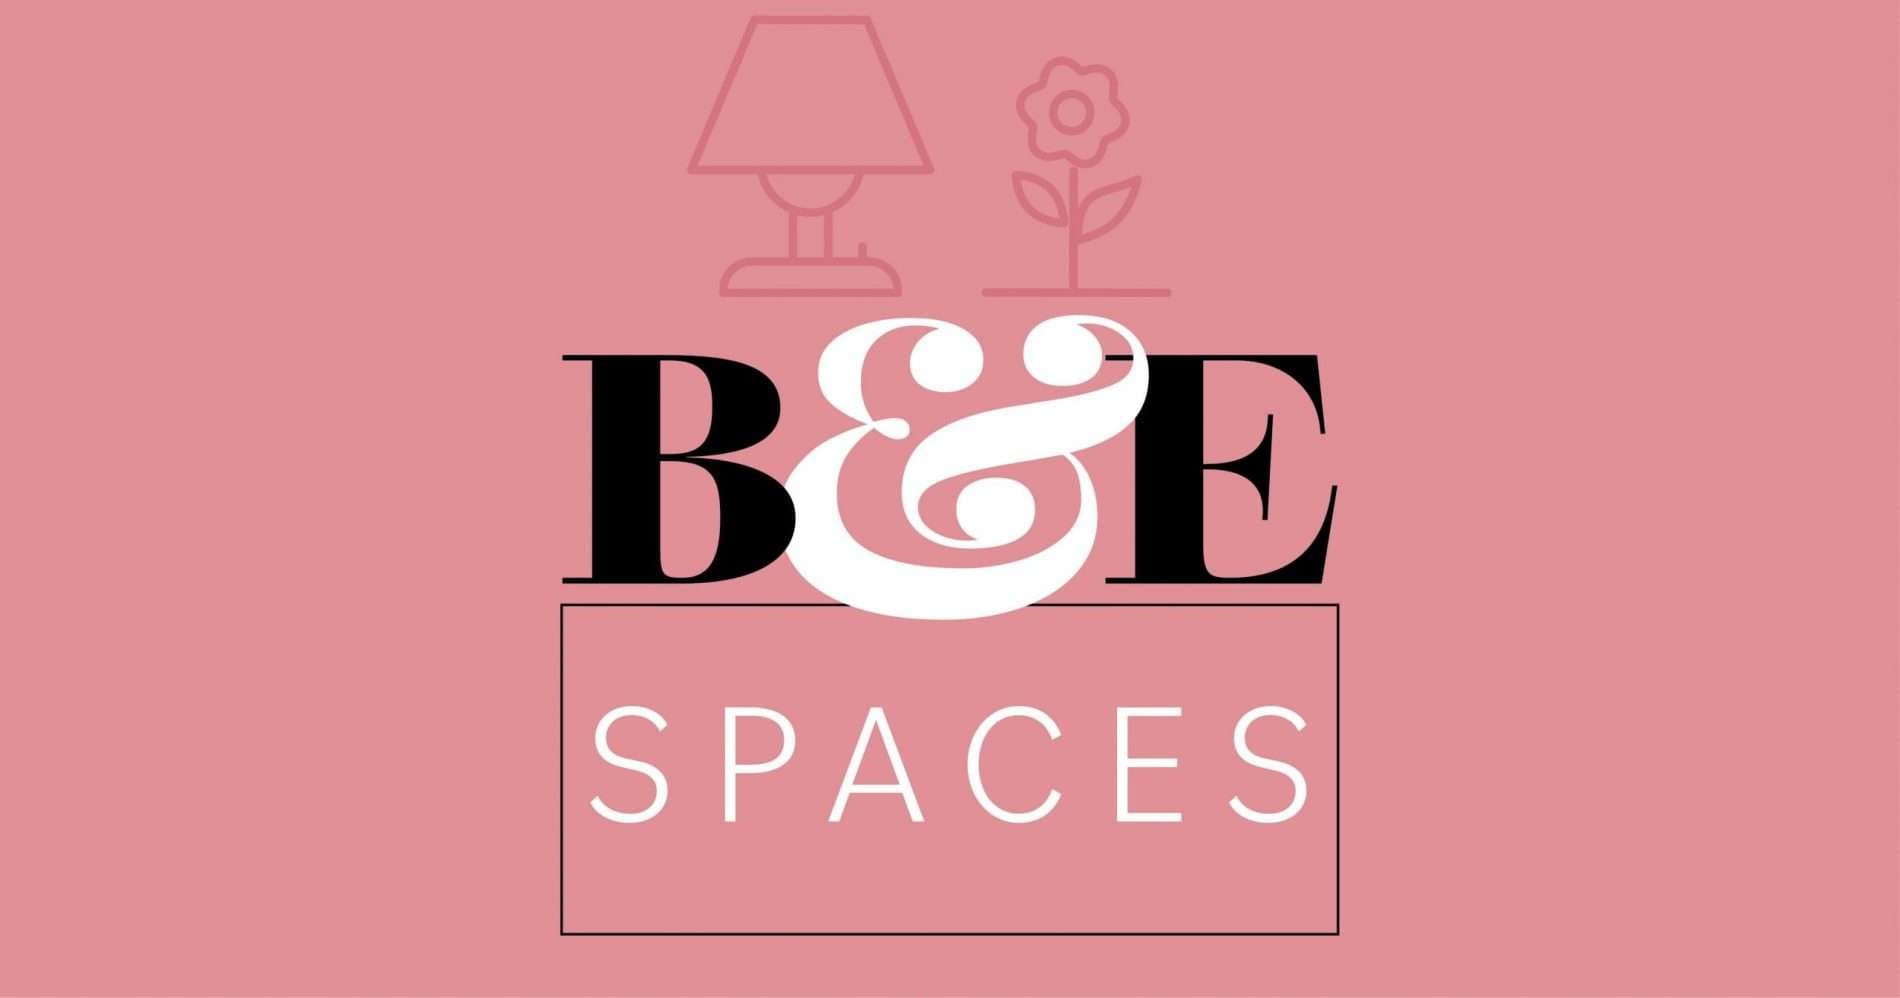 Spaces: Stop and Smell the Roses